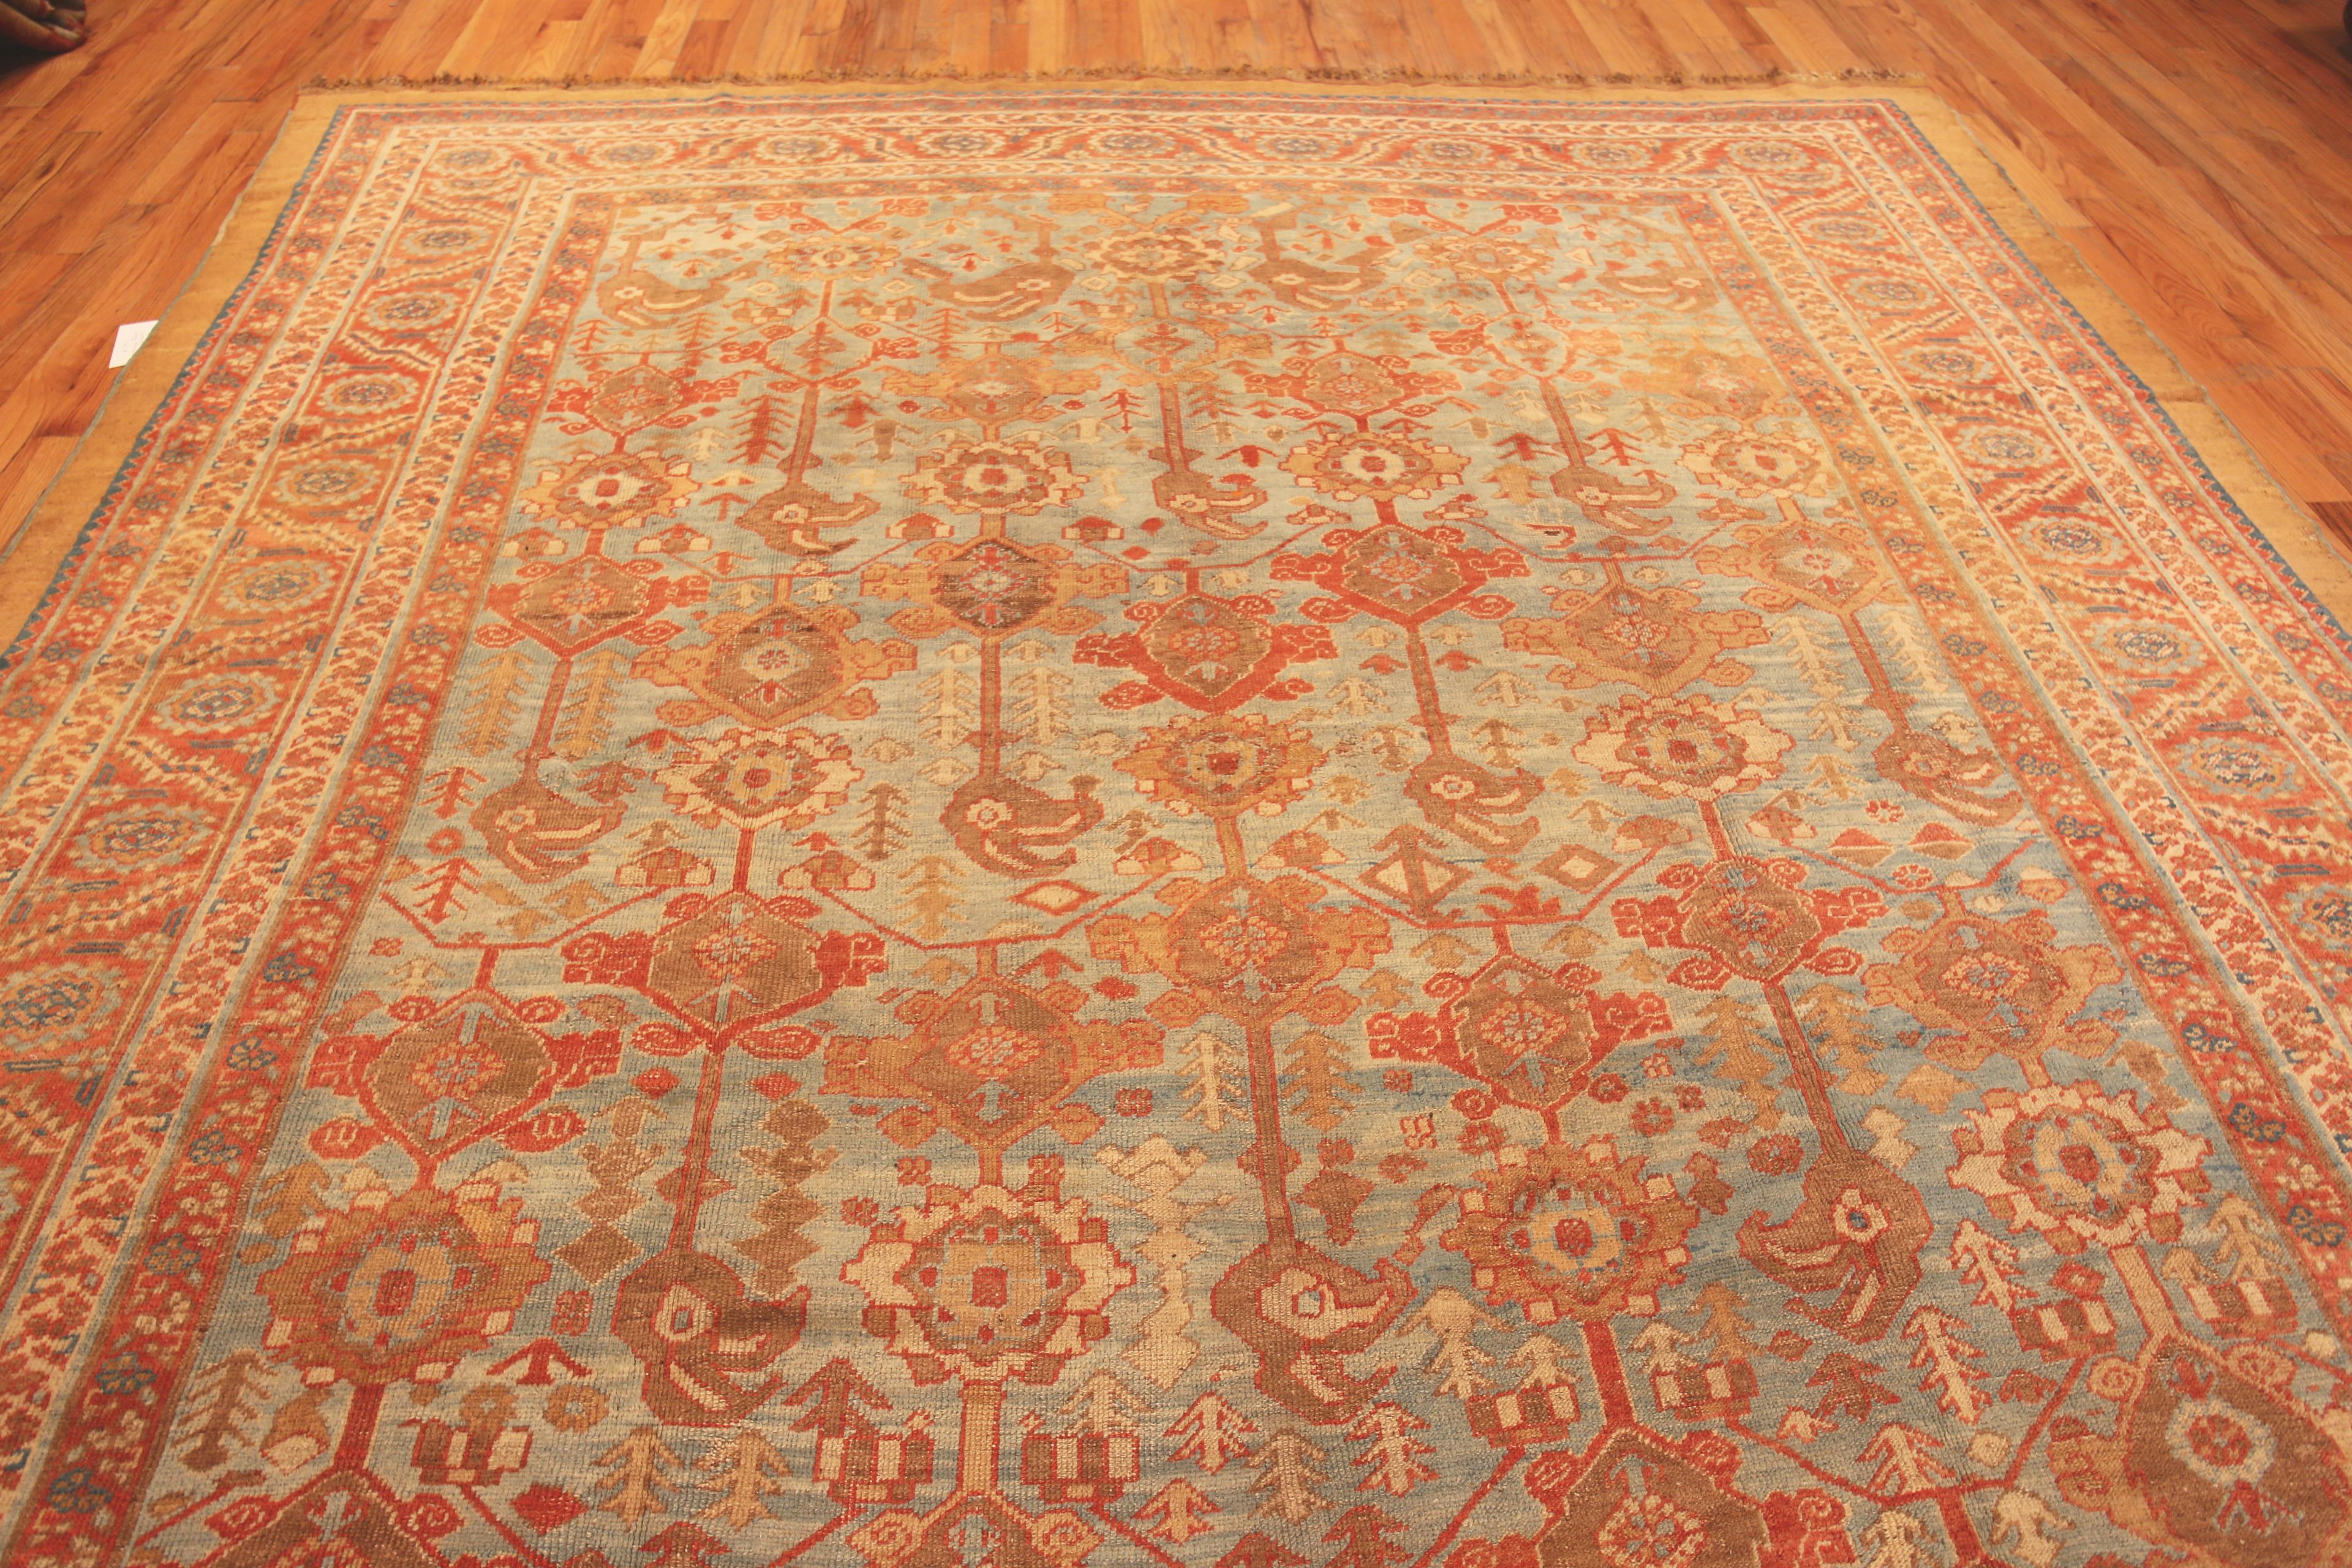 Large Antique Persian Bakshaish Rug, Country of Origin / rug type: Persian rug, Circa date: 1880. Size: 13 ft 7 in x 18 ft (4.14 m x 5.49 m)


